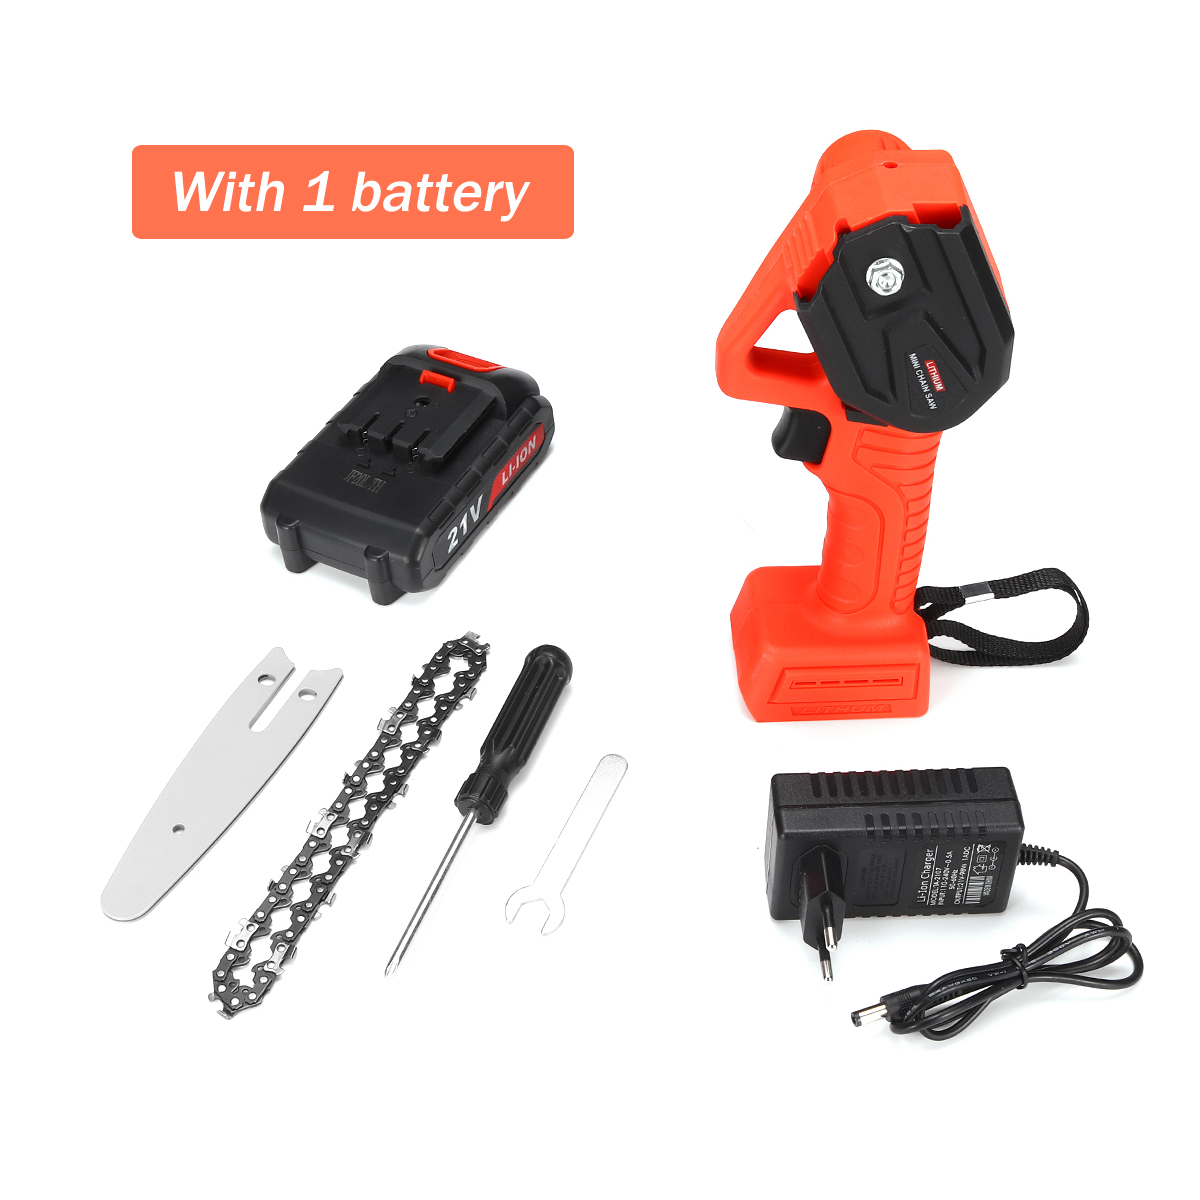 600W-4Inch-Cordless-Electric-Chain-Saw-Wood-Cutter-Tools-Garden-Woodwork-W-1pc-or-2pcs-Battery-1801758-9